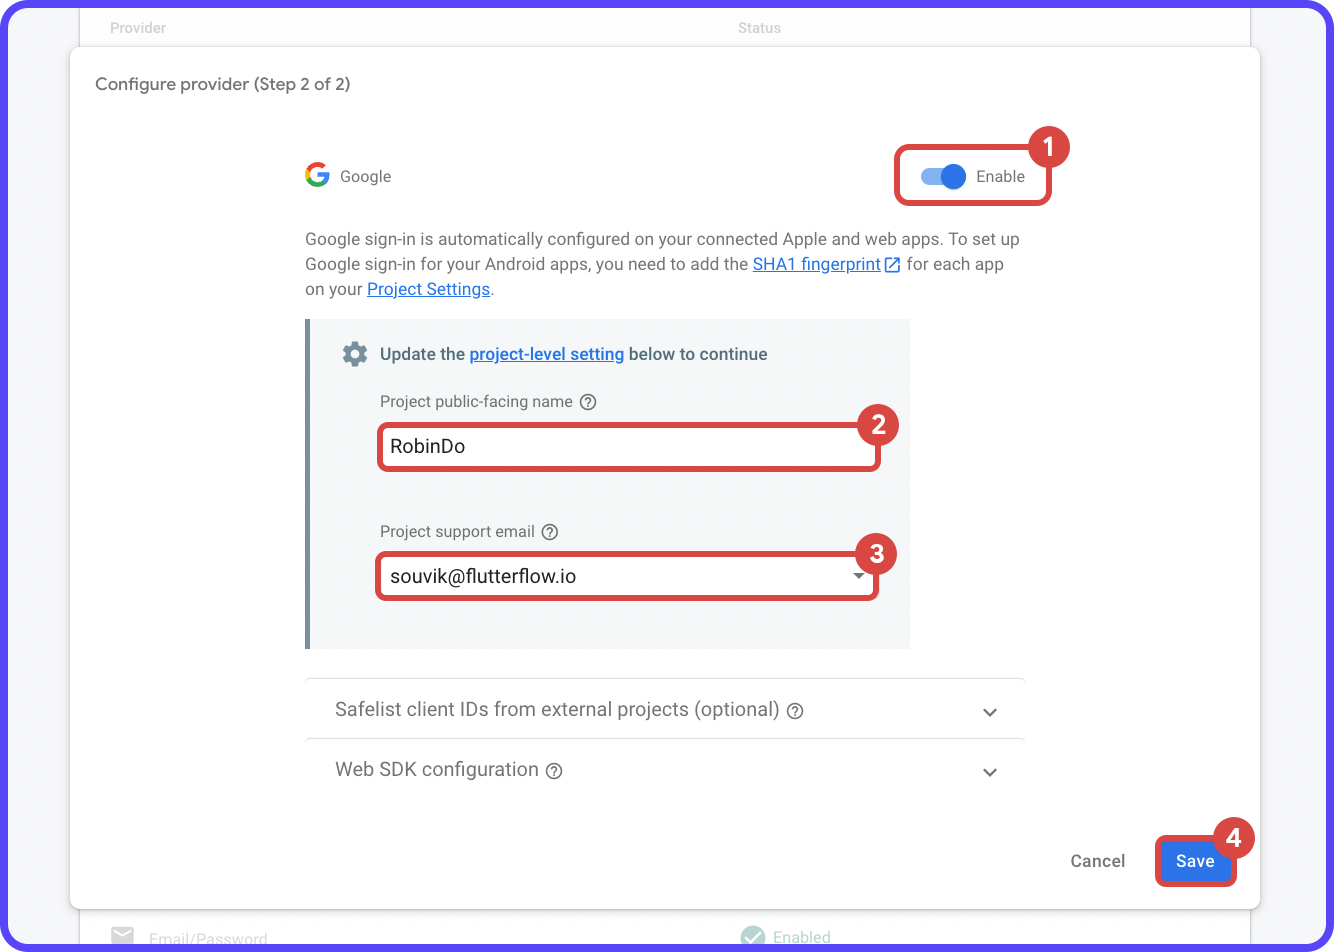 Enabling Google sign-in provider by providing a public facing name and a support email